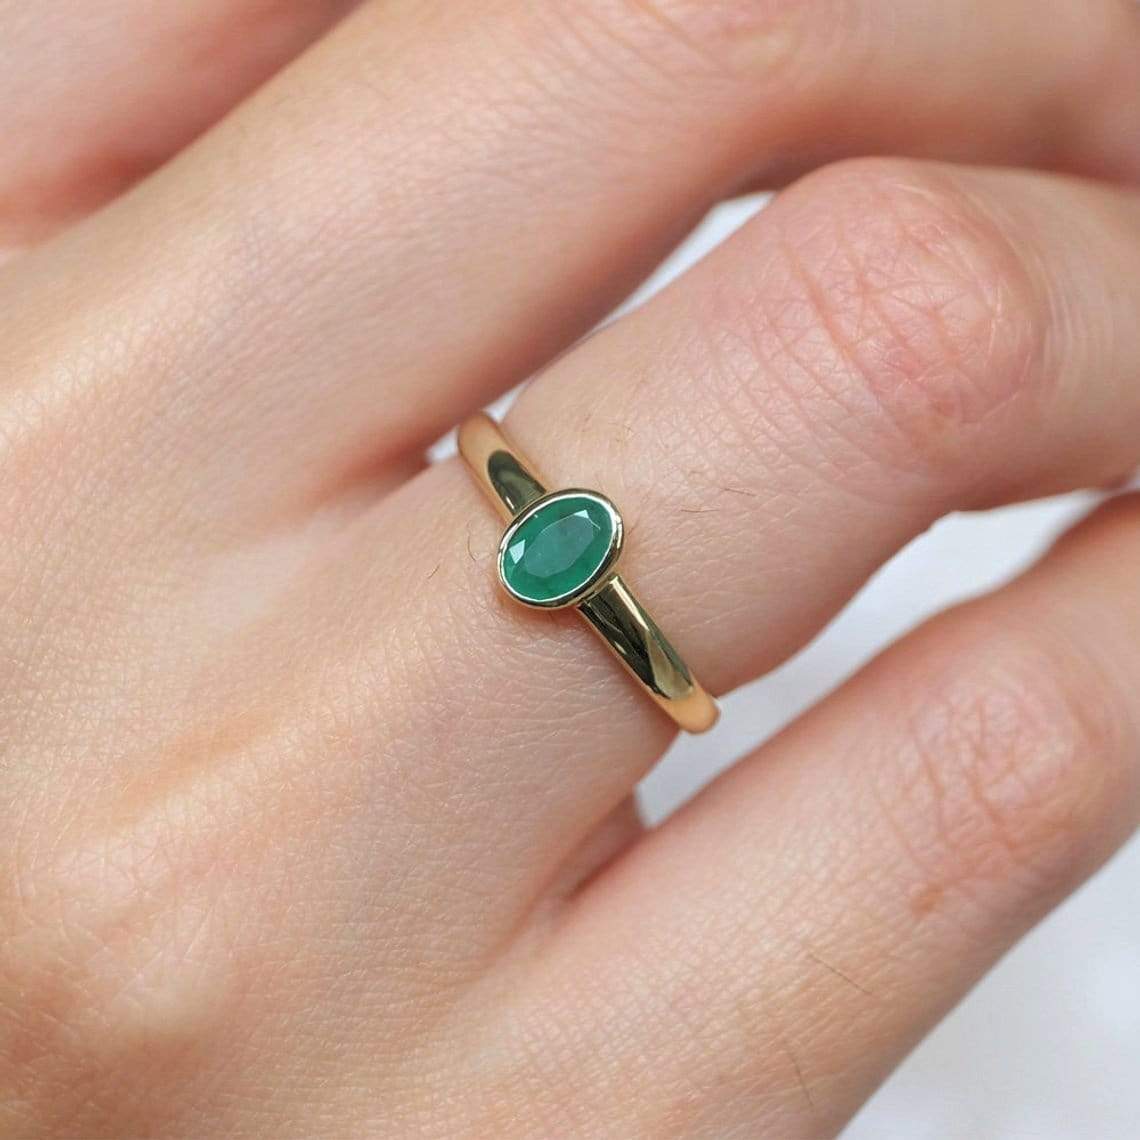 0.39 Carats 14k Solid Gold Emerald Engagement Ring - SOVATS